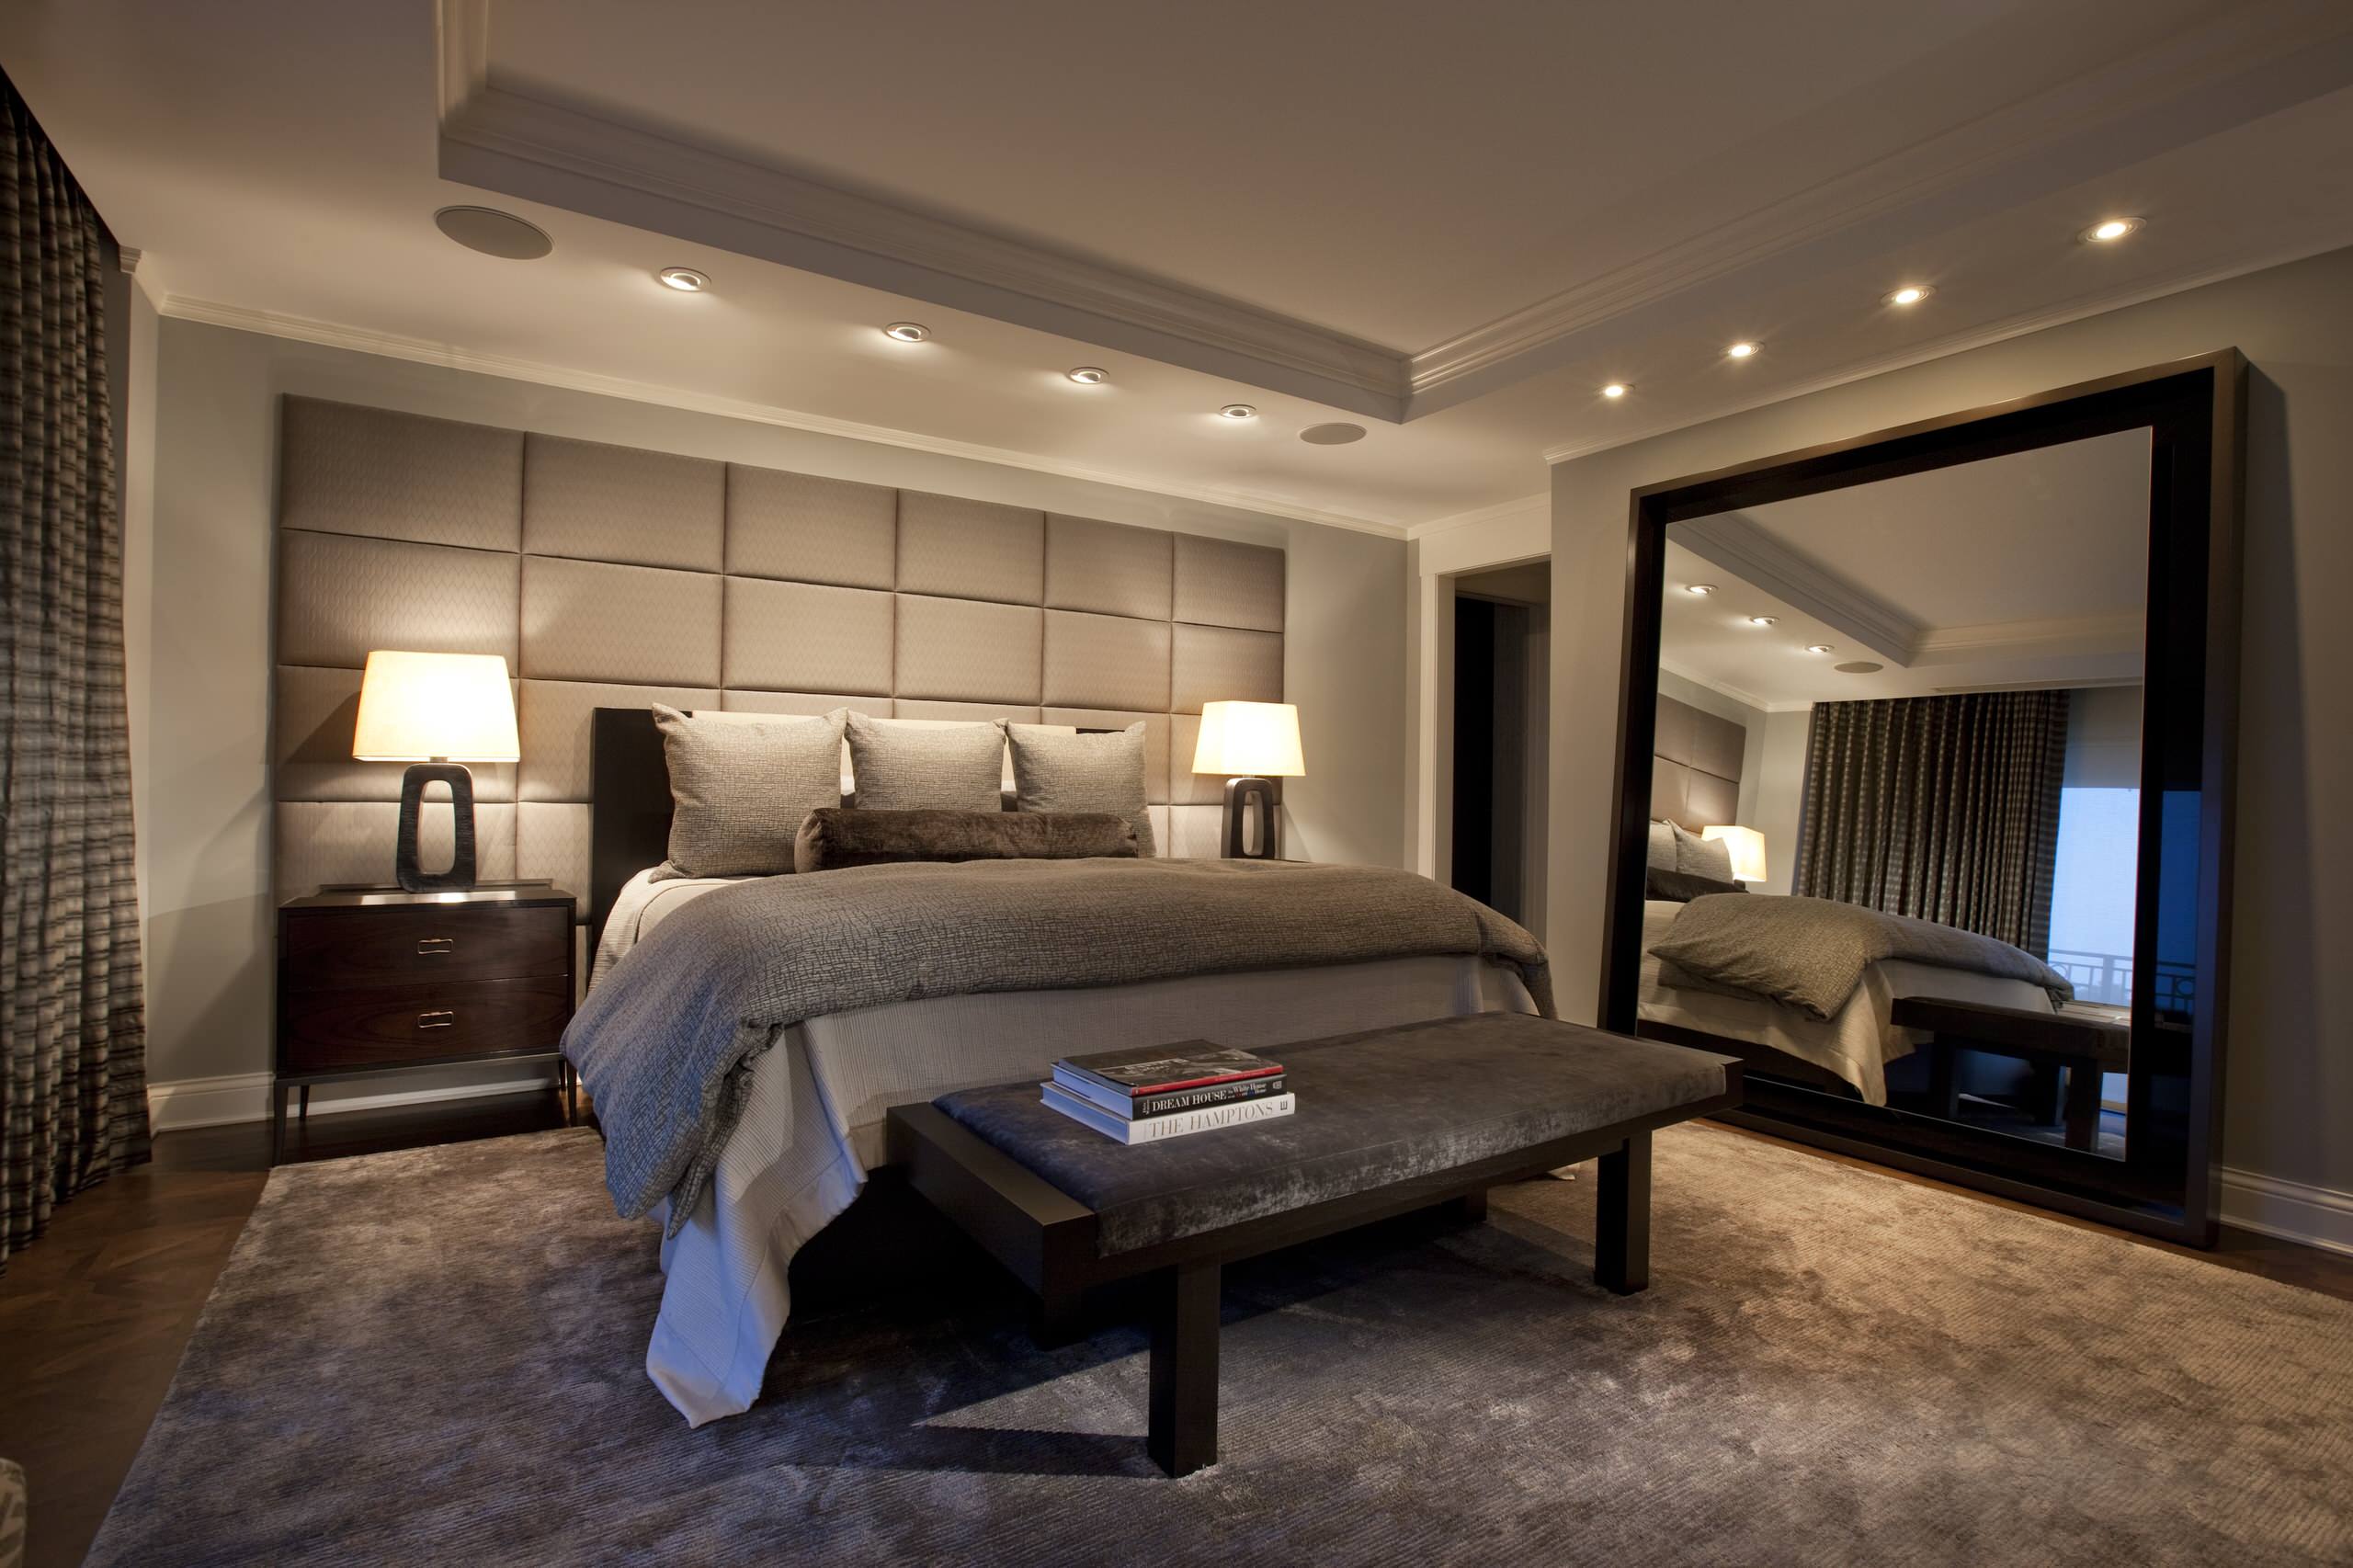 75 Beautiful Master Bedroom Pictures Ideas April 2021 Houzz